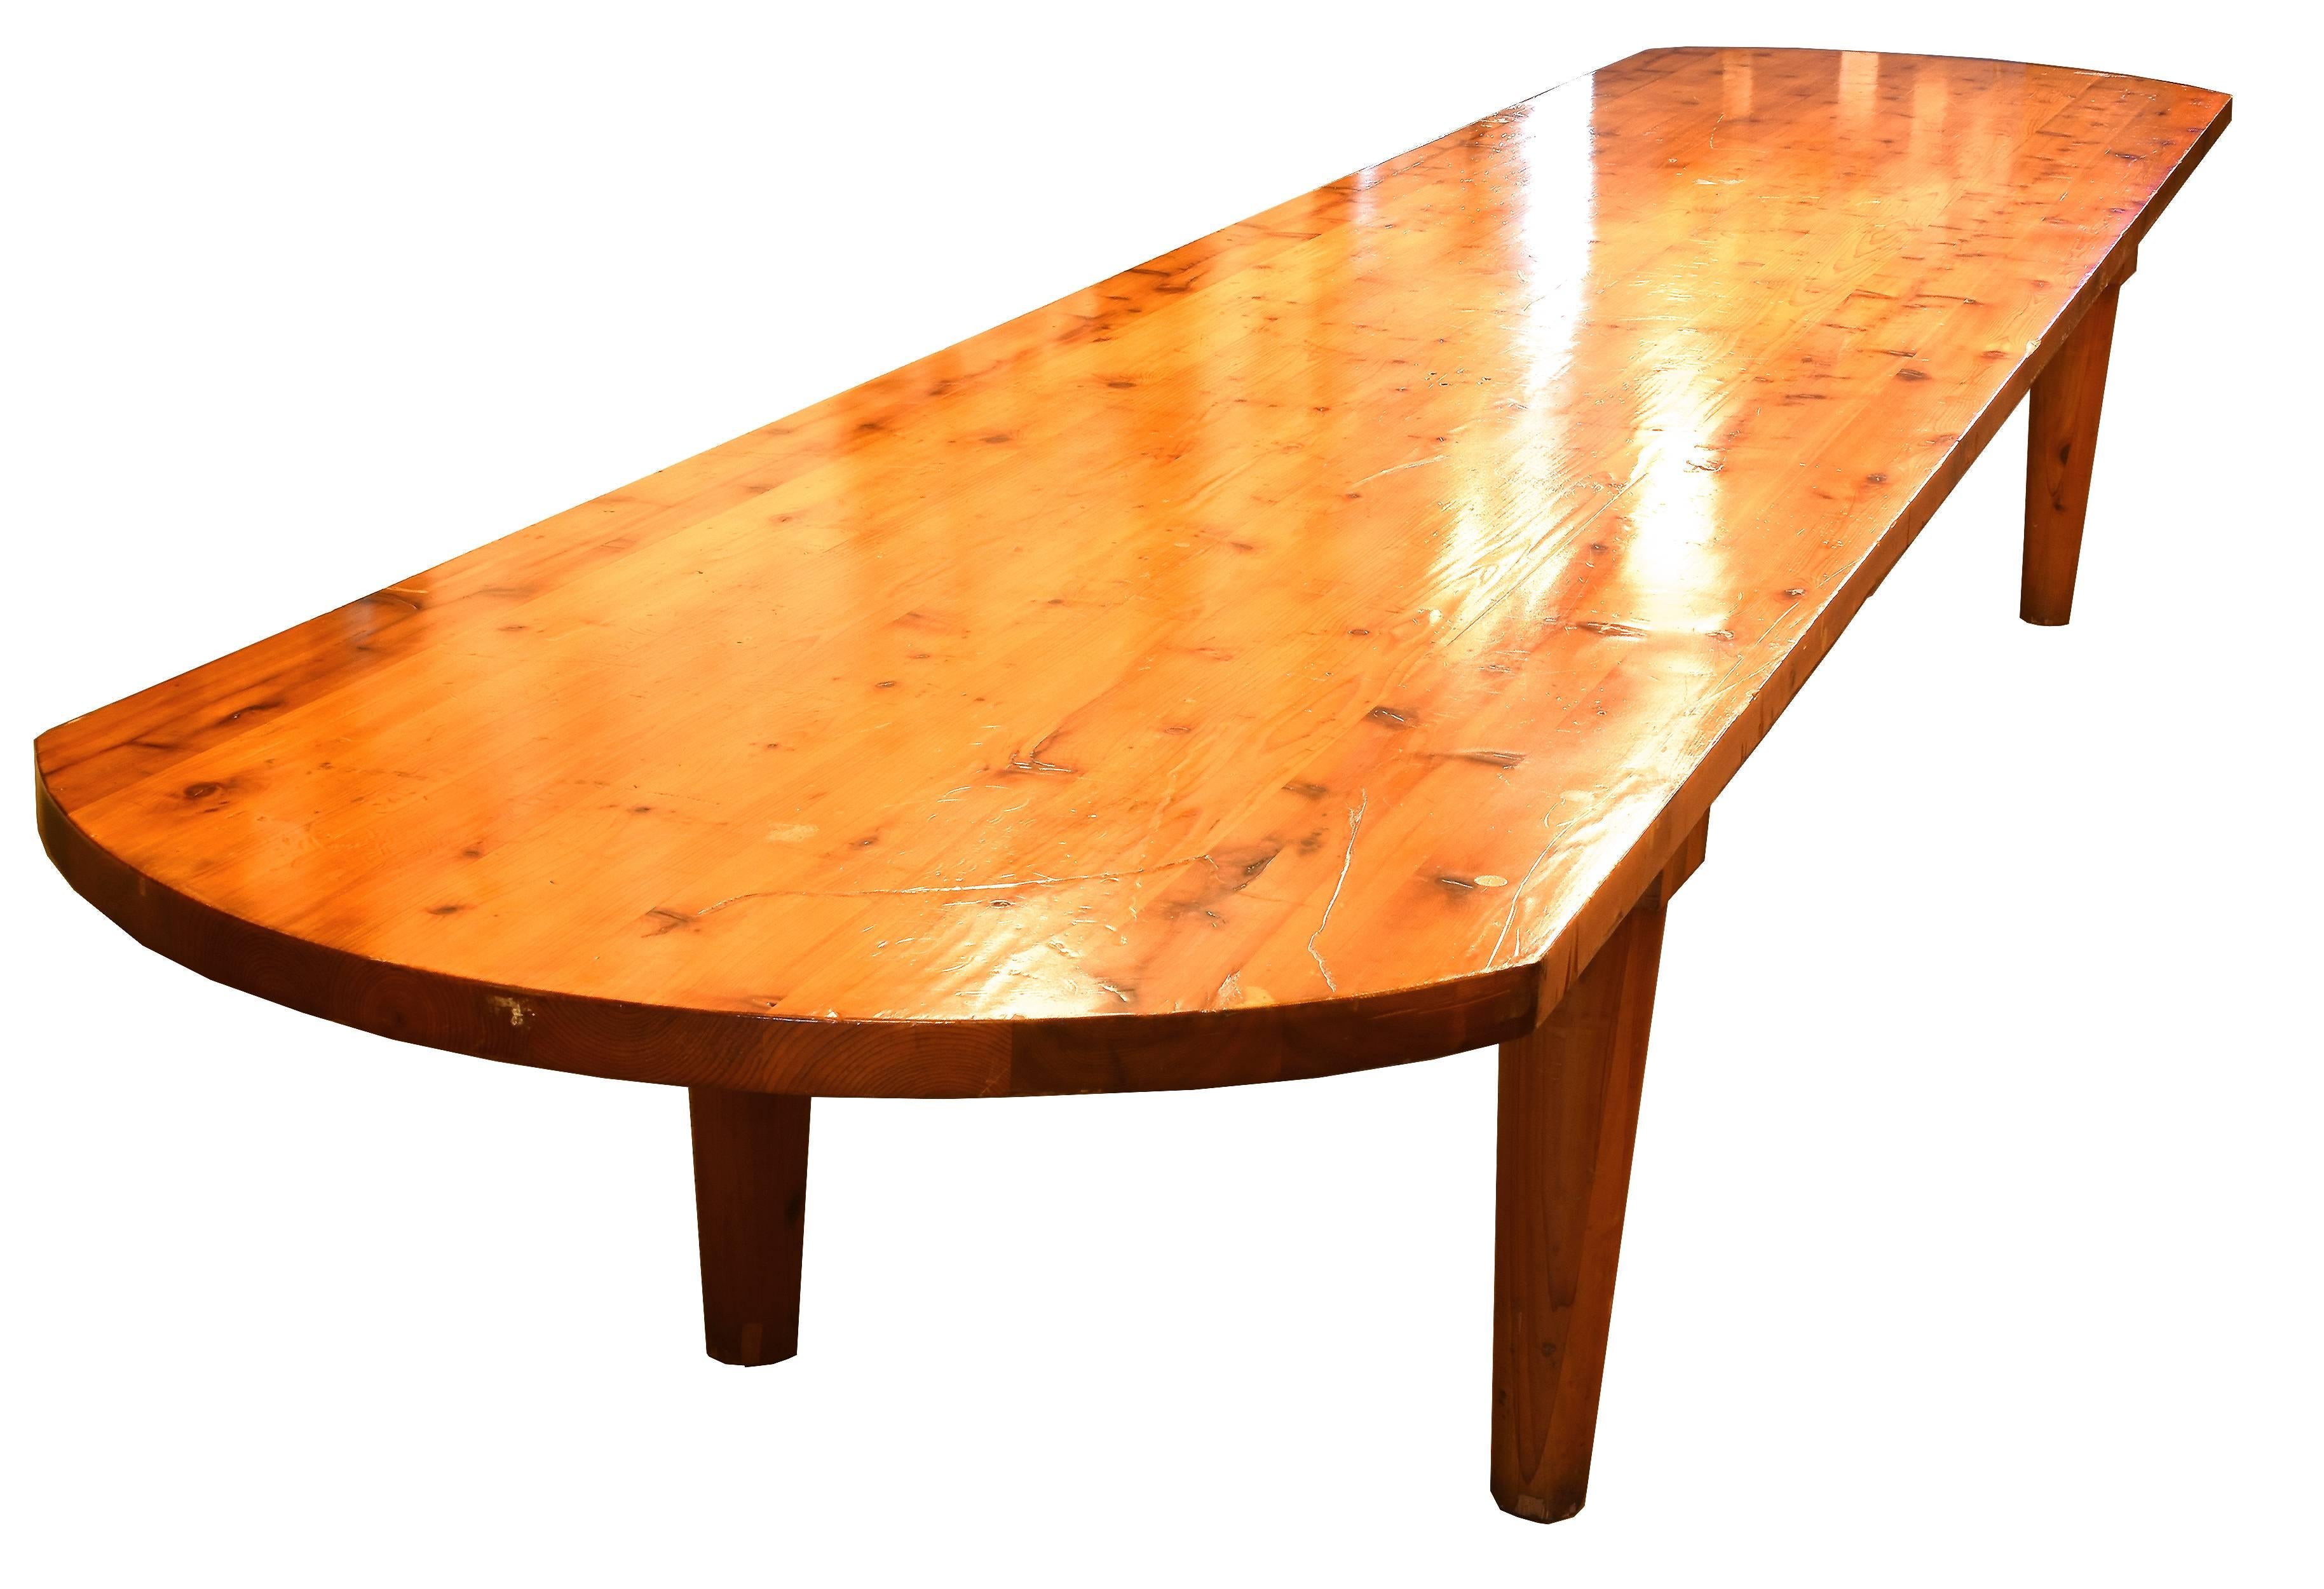 At over 16 feet long, this incredible pine table is a true statement piece! Gently curved edges create nice flow and a smooth matte finish enhances the beautiful wood grain. 

Measures: 29